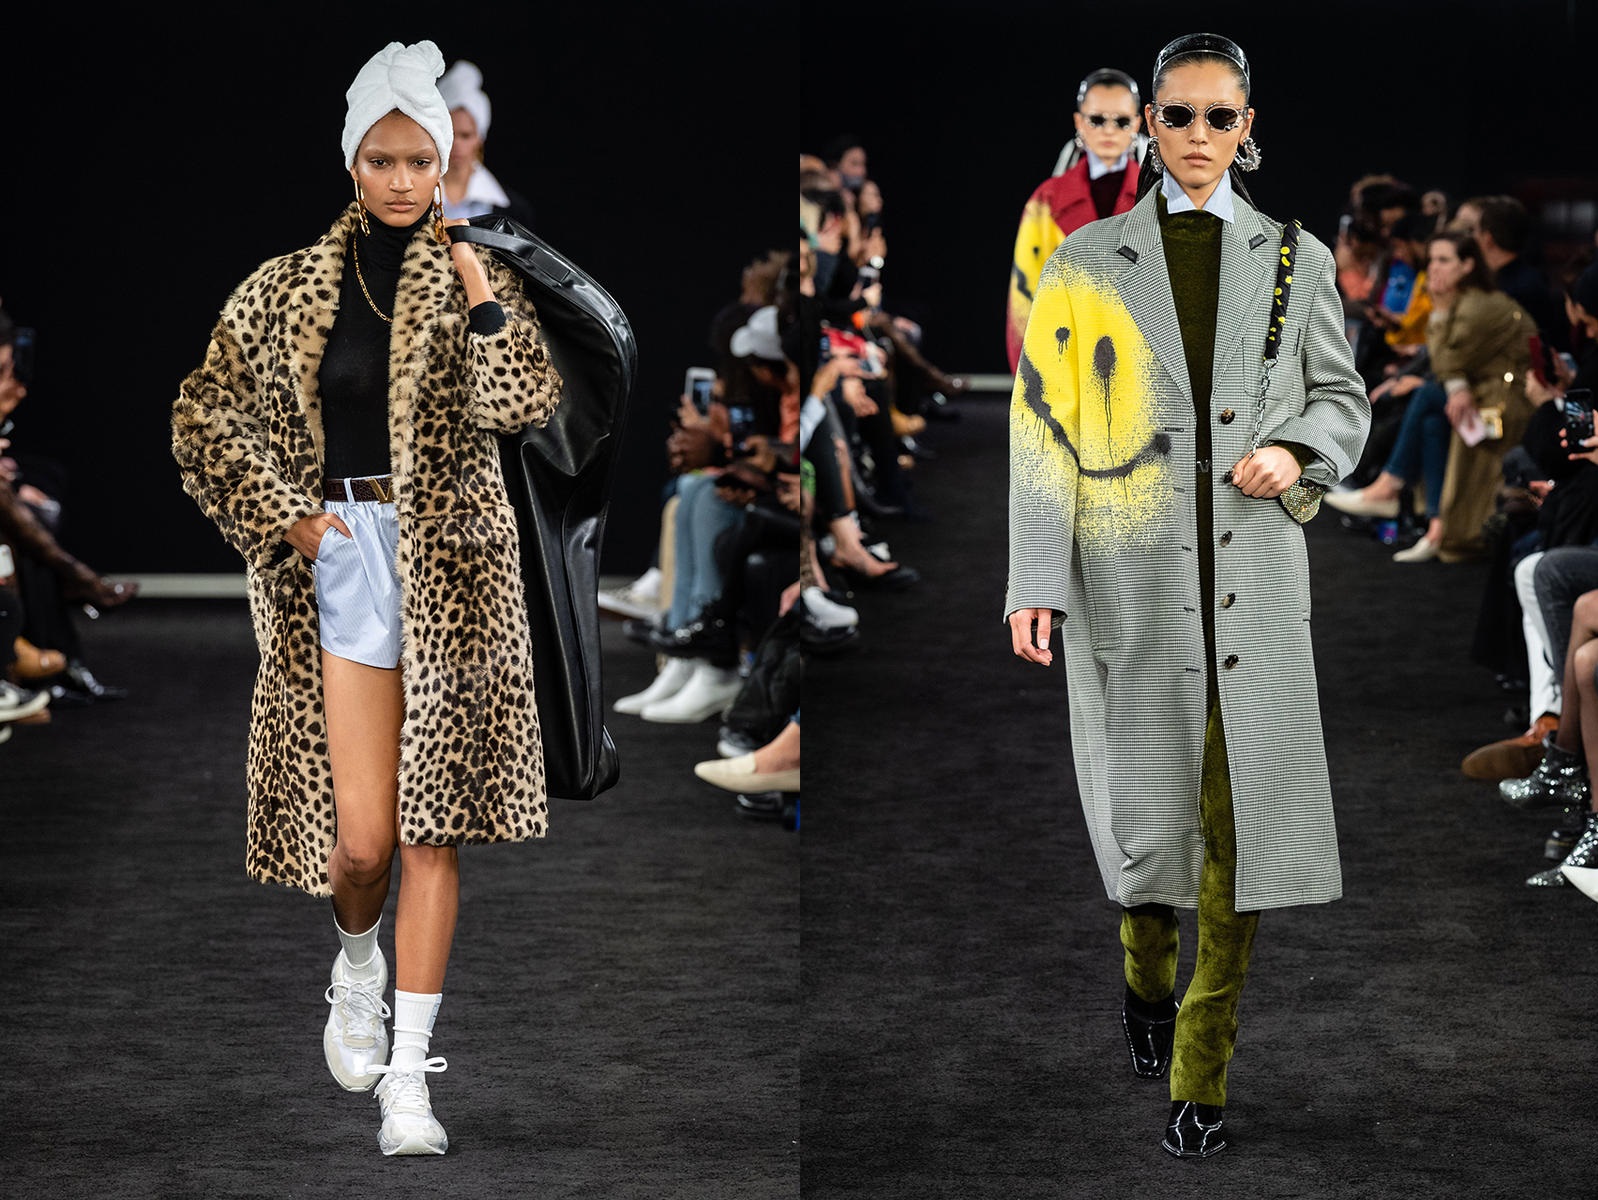 Alexander Wang Focuses on the American Hustle with his Pre-Fall 2019 Display